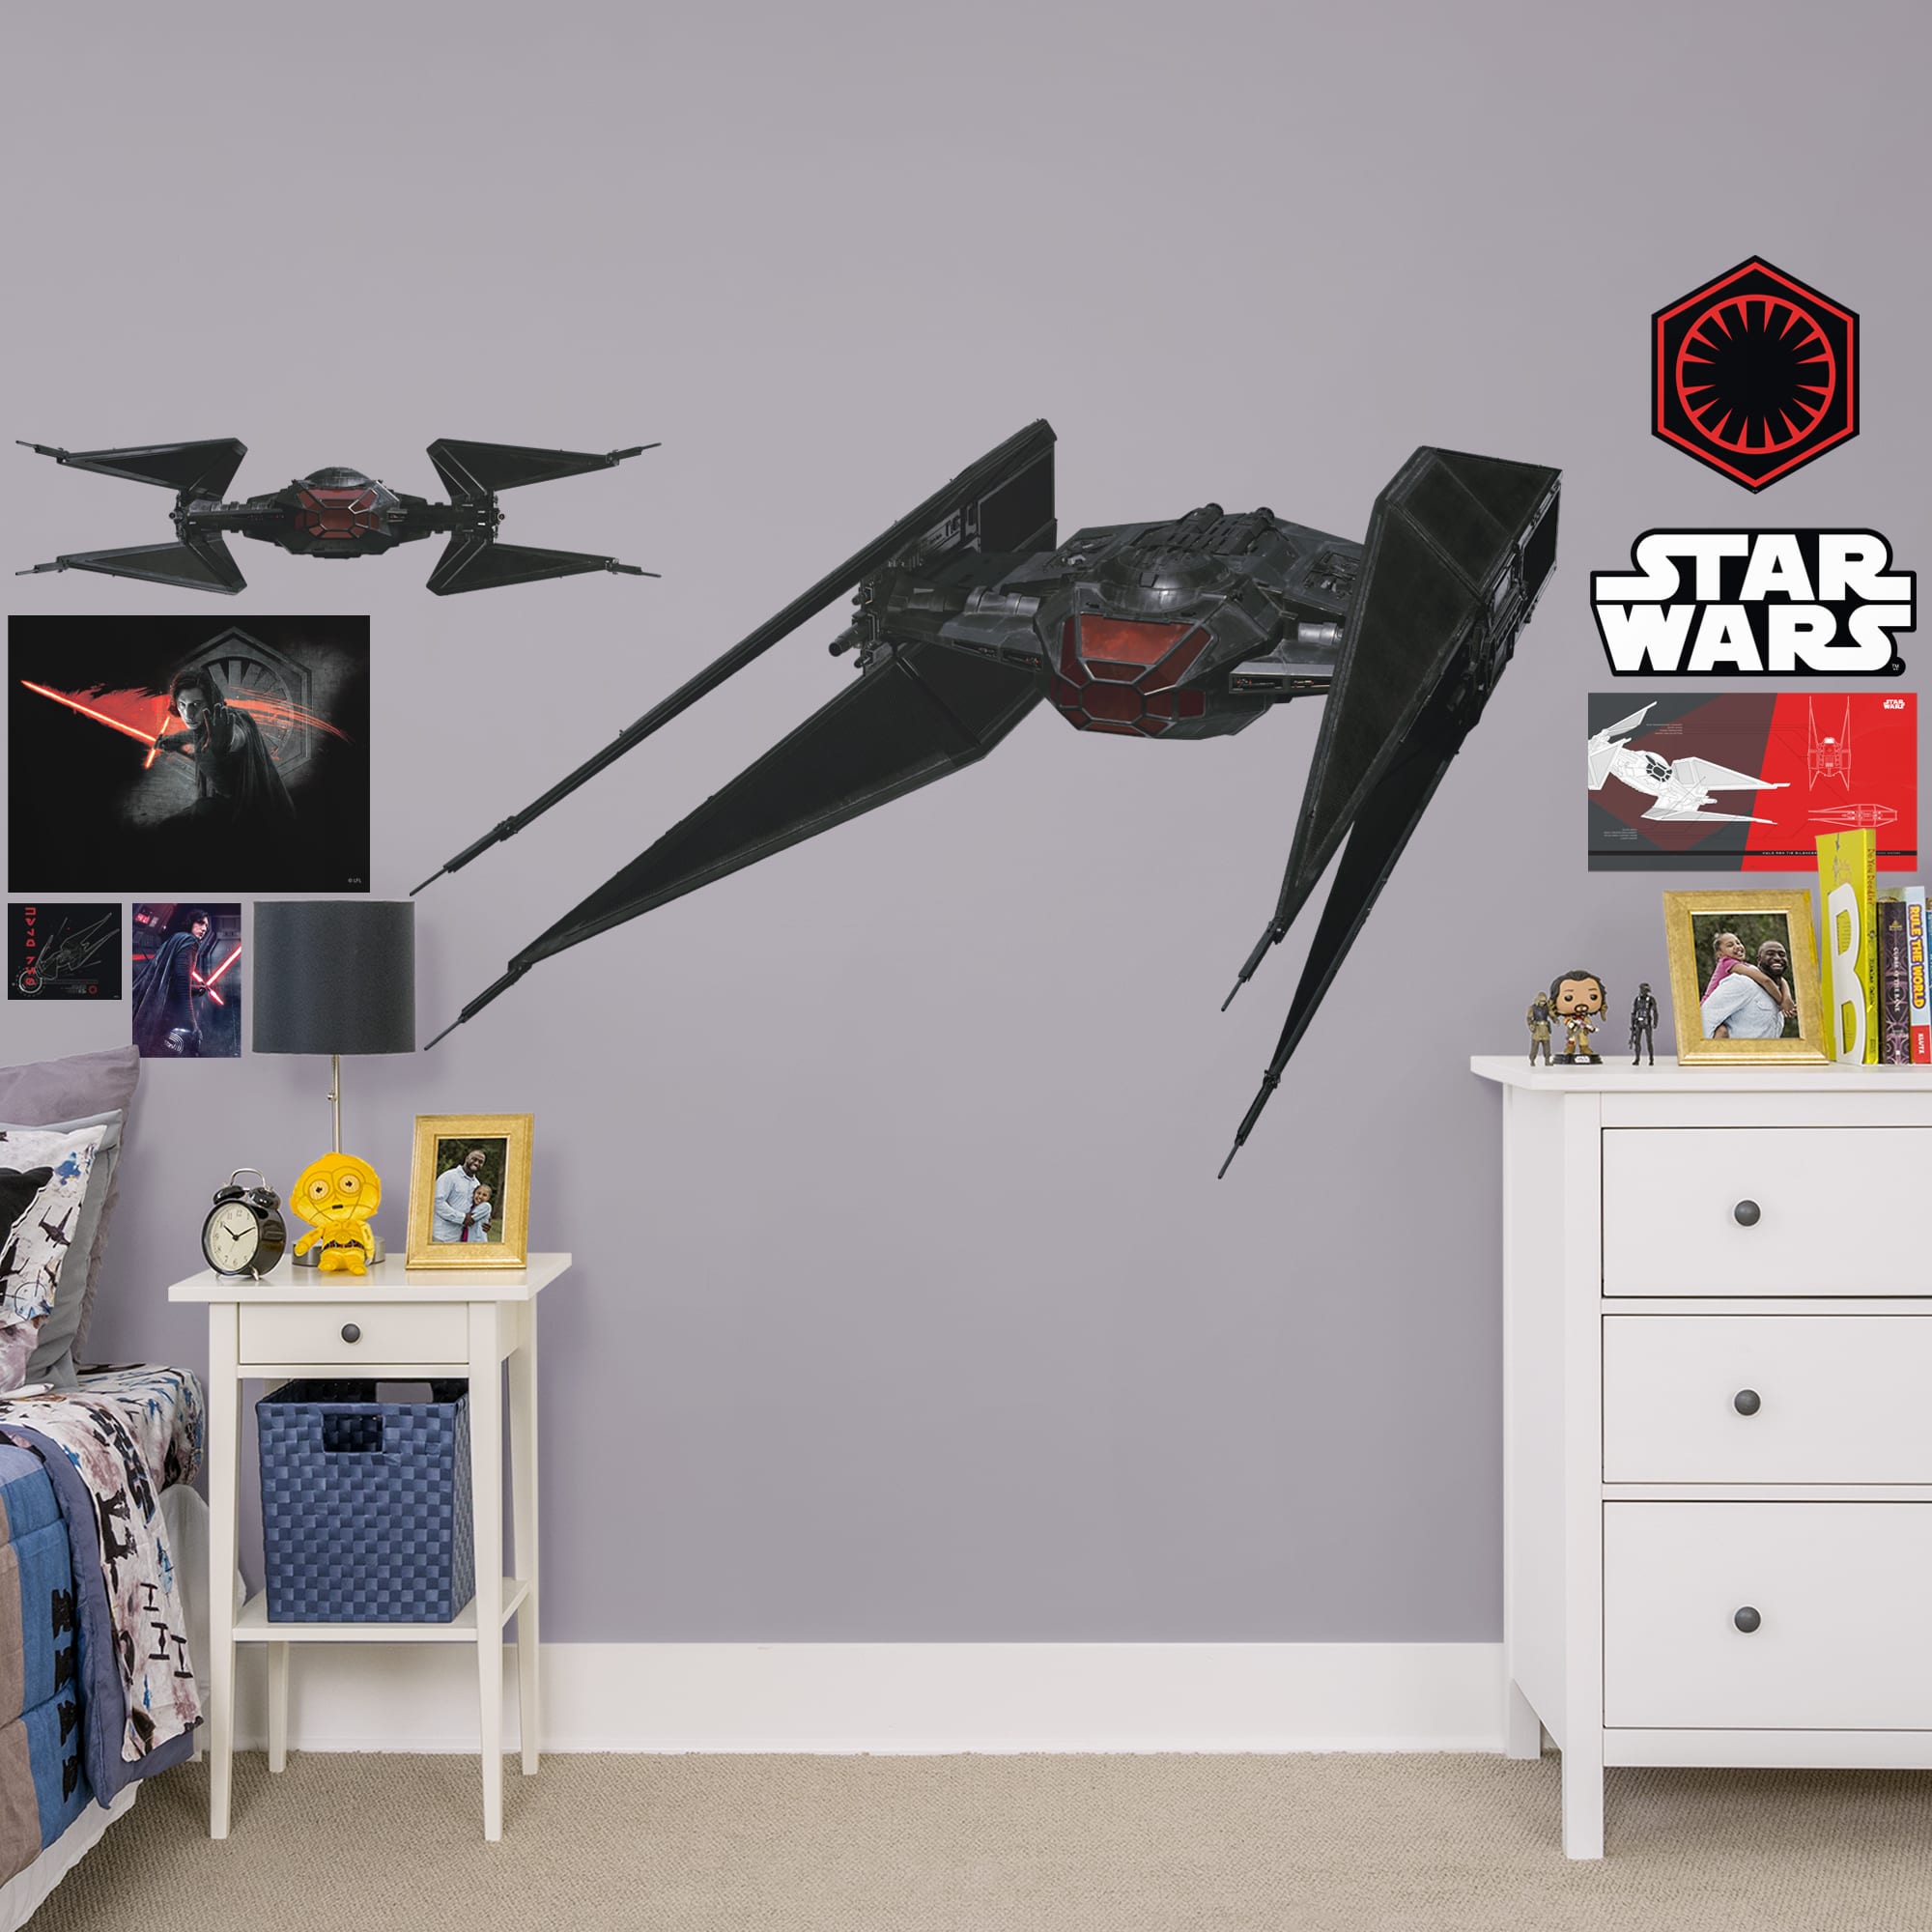 TIE Silencer - Officially Licensed Removable Wall Decal Huge Ship + 7 Decals (63"W x 41"H) by Fathead | Vinyl